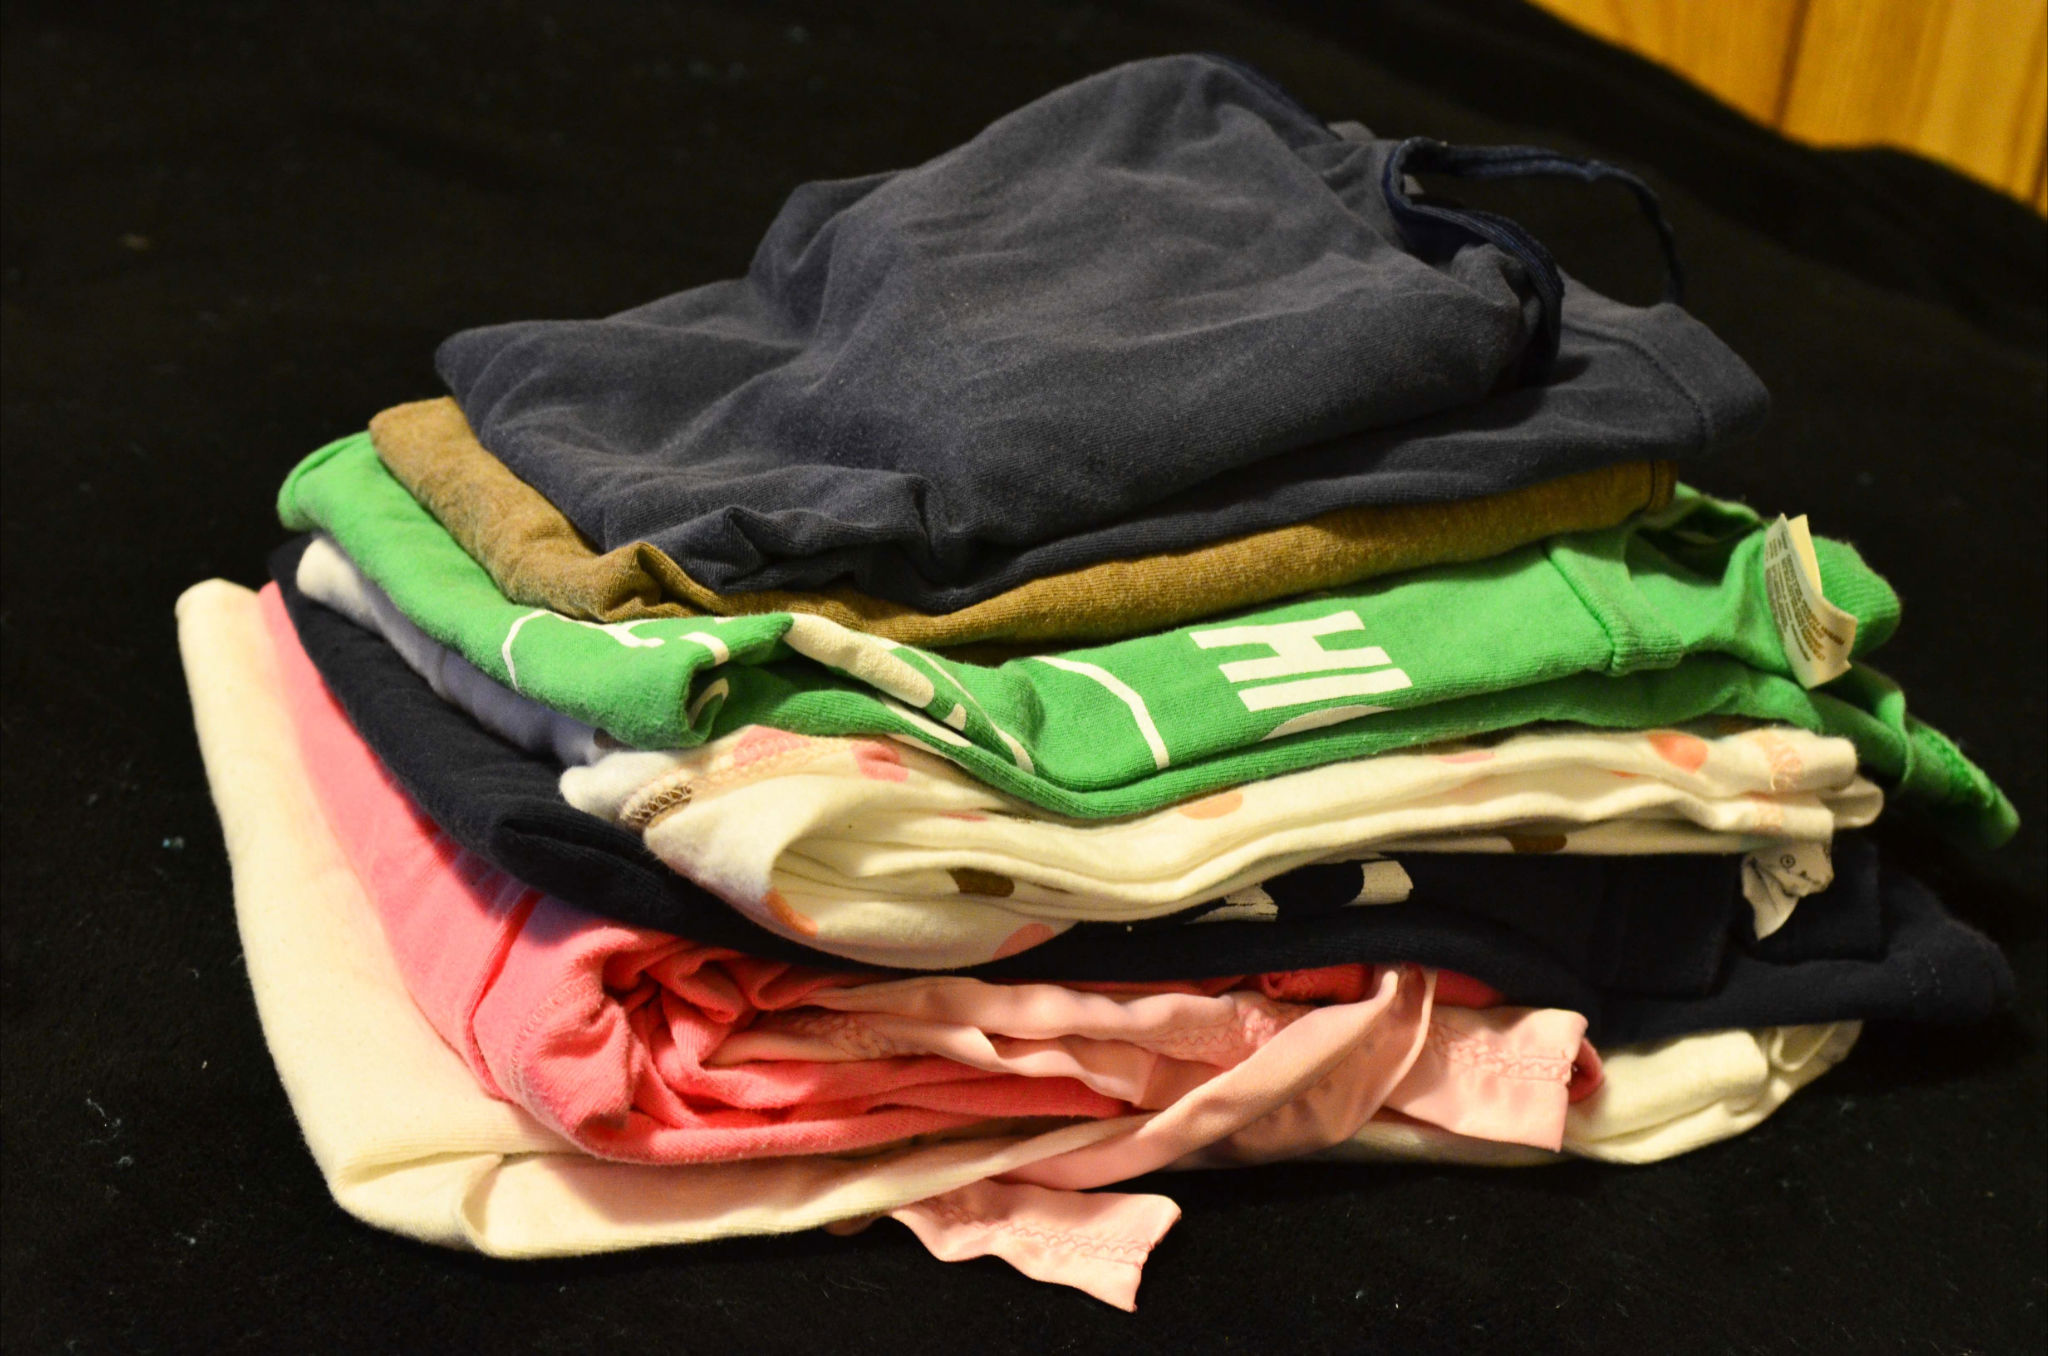 the clothes are folded up on the black table